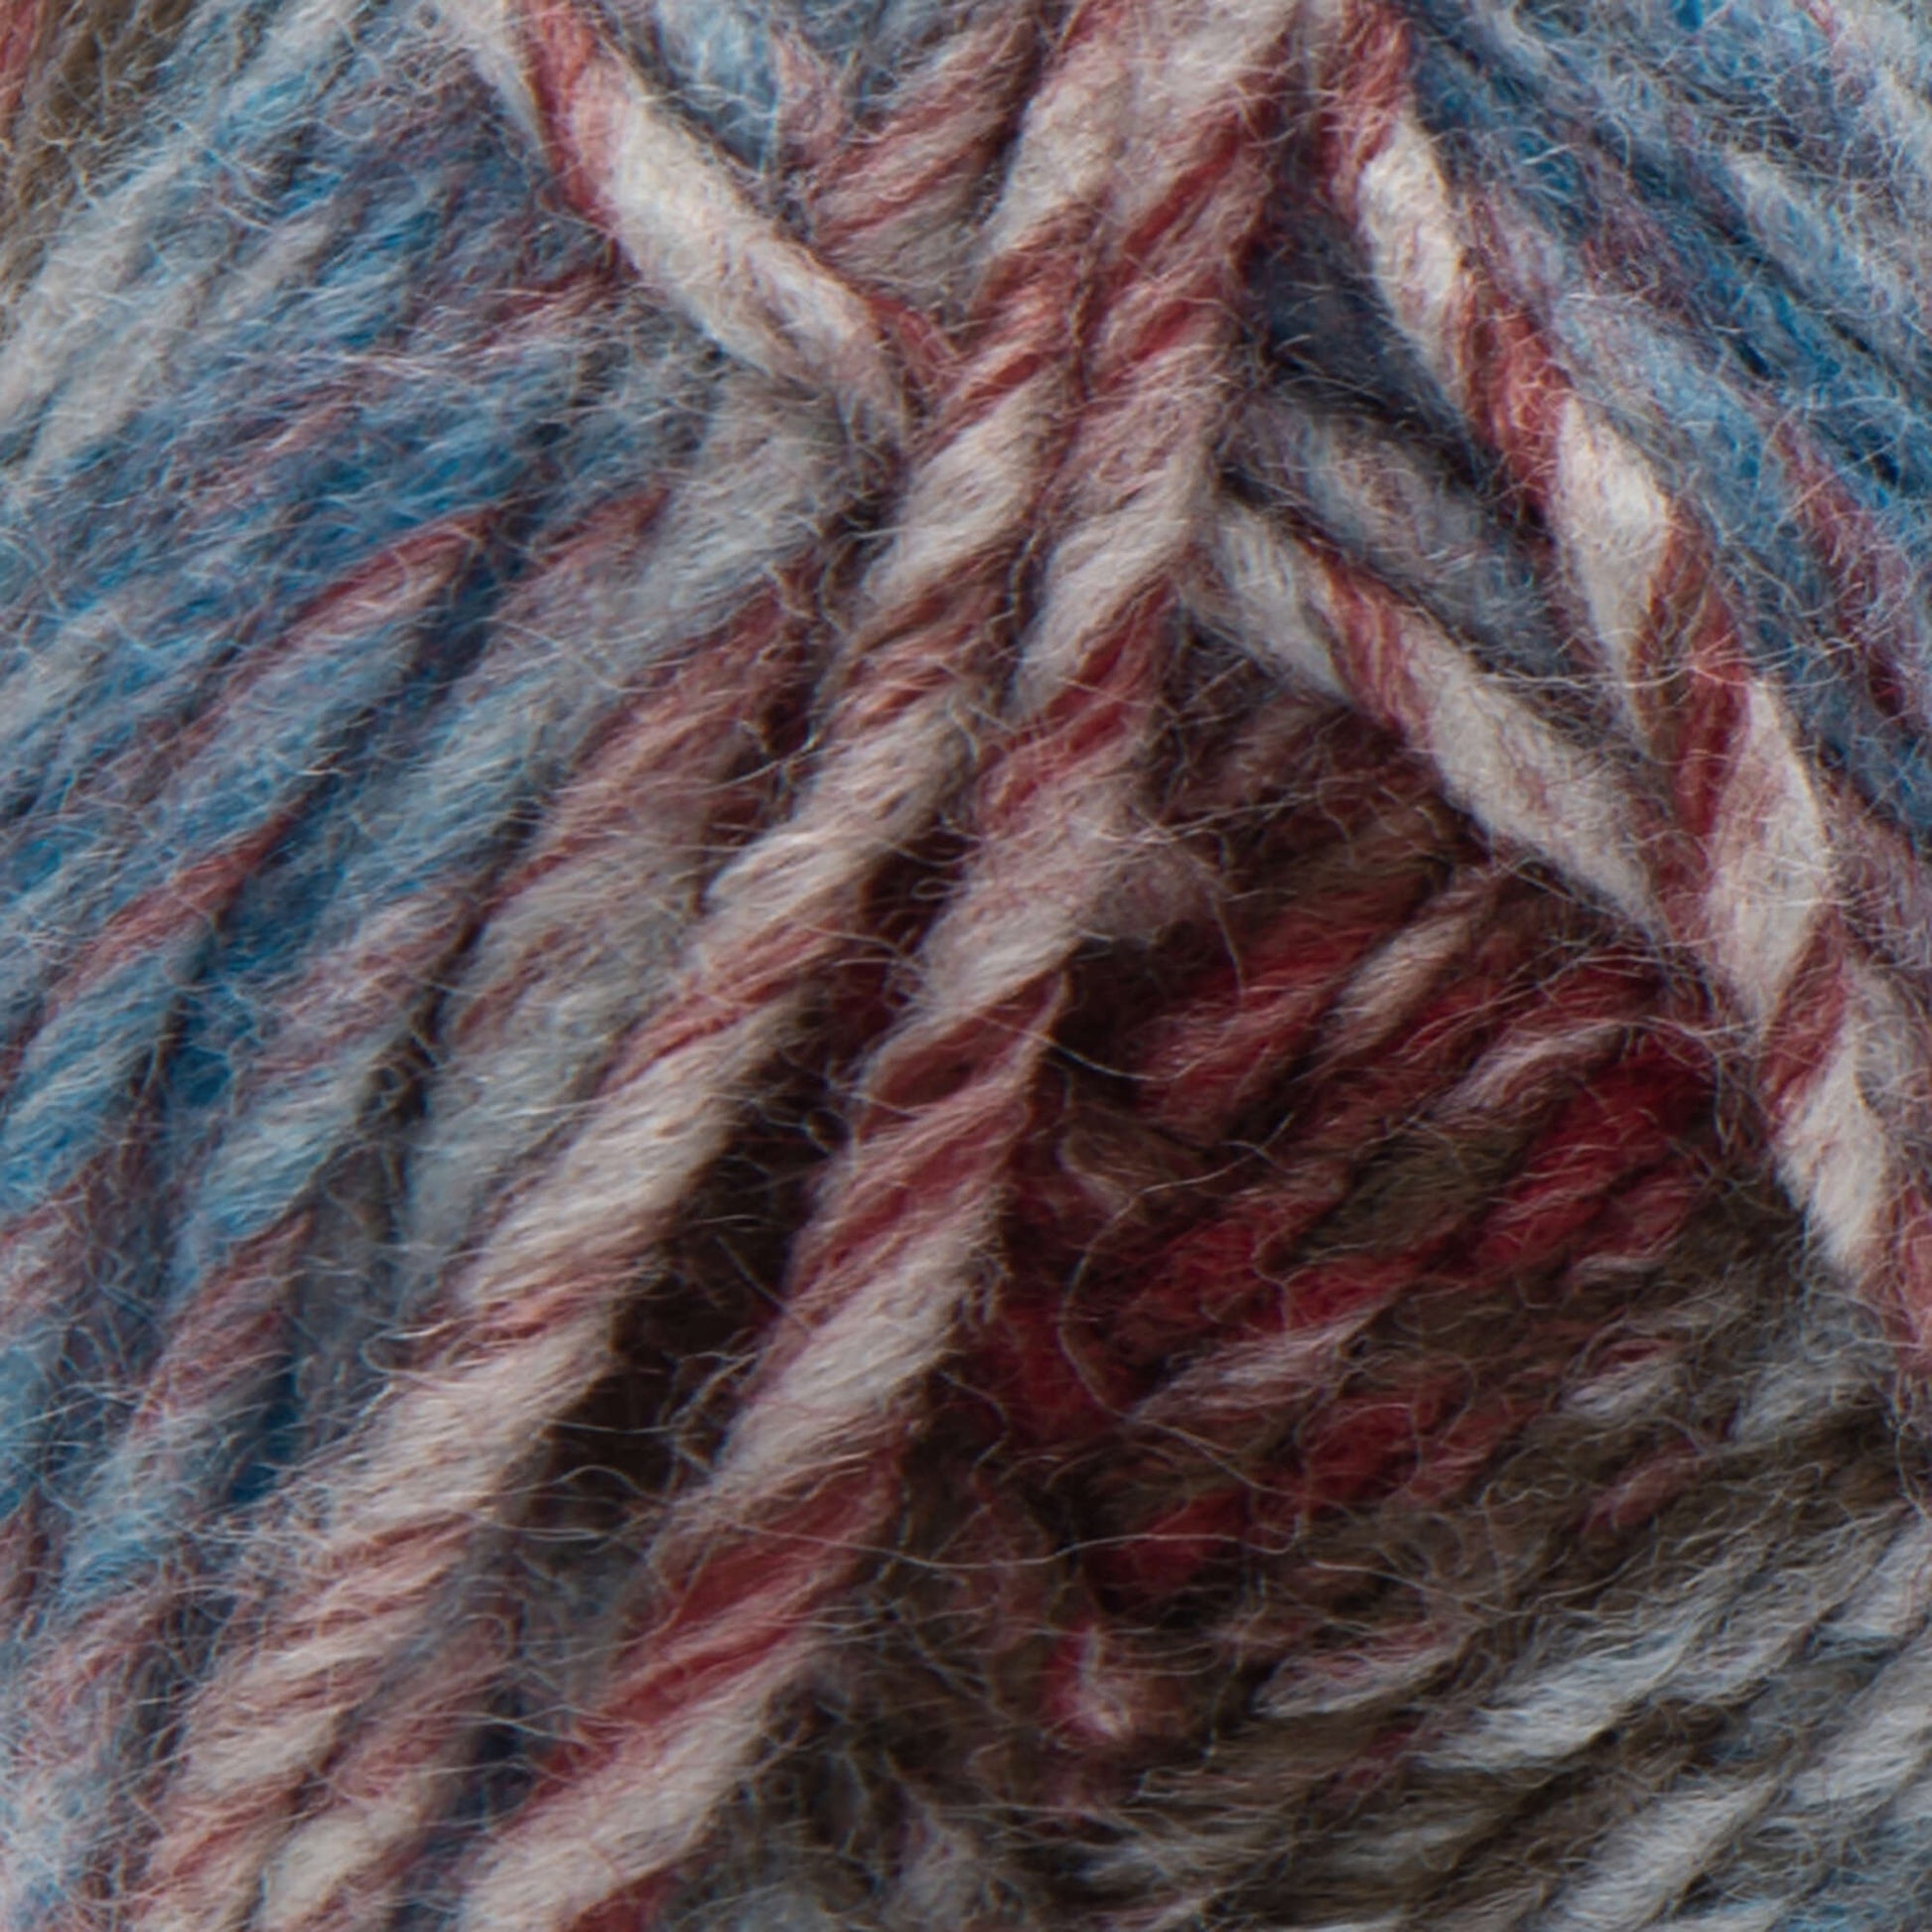 Red Heart Colorscape Yarn - Discontinued shades Paris